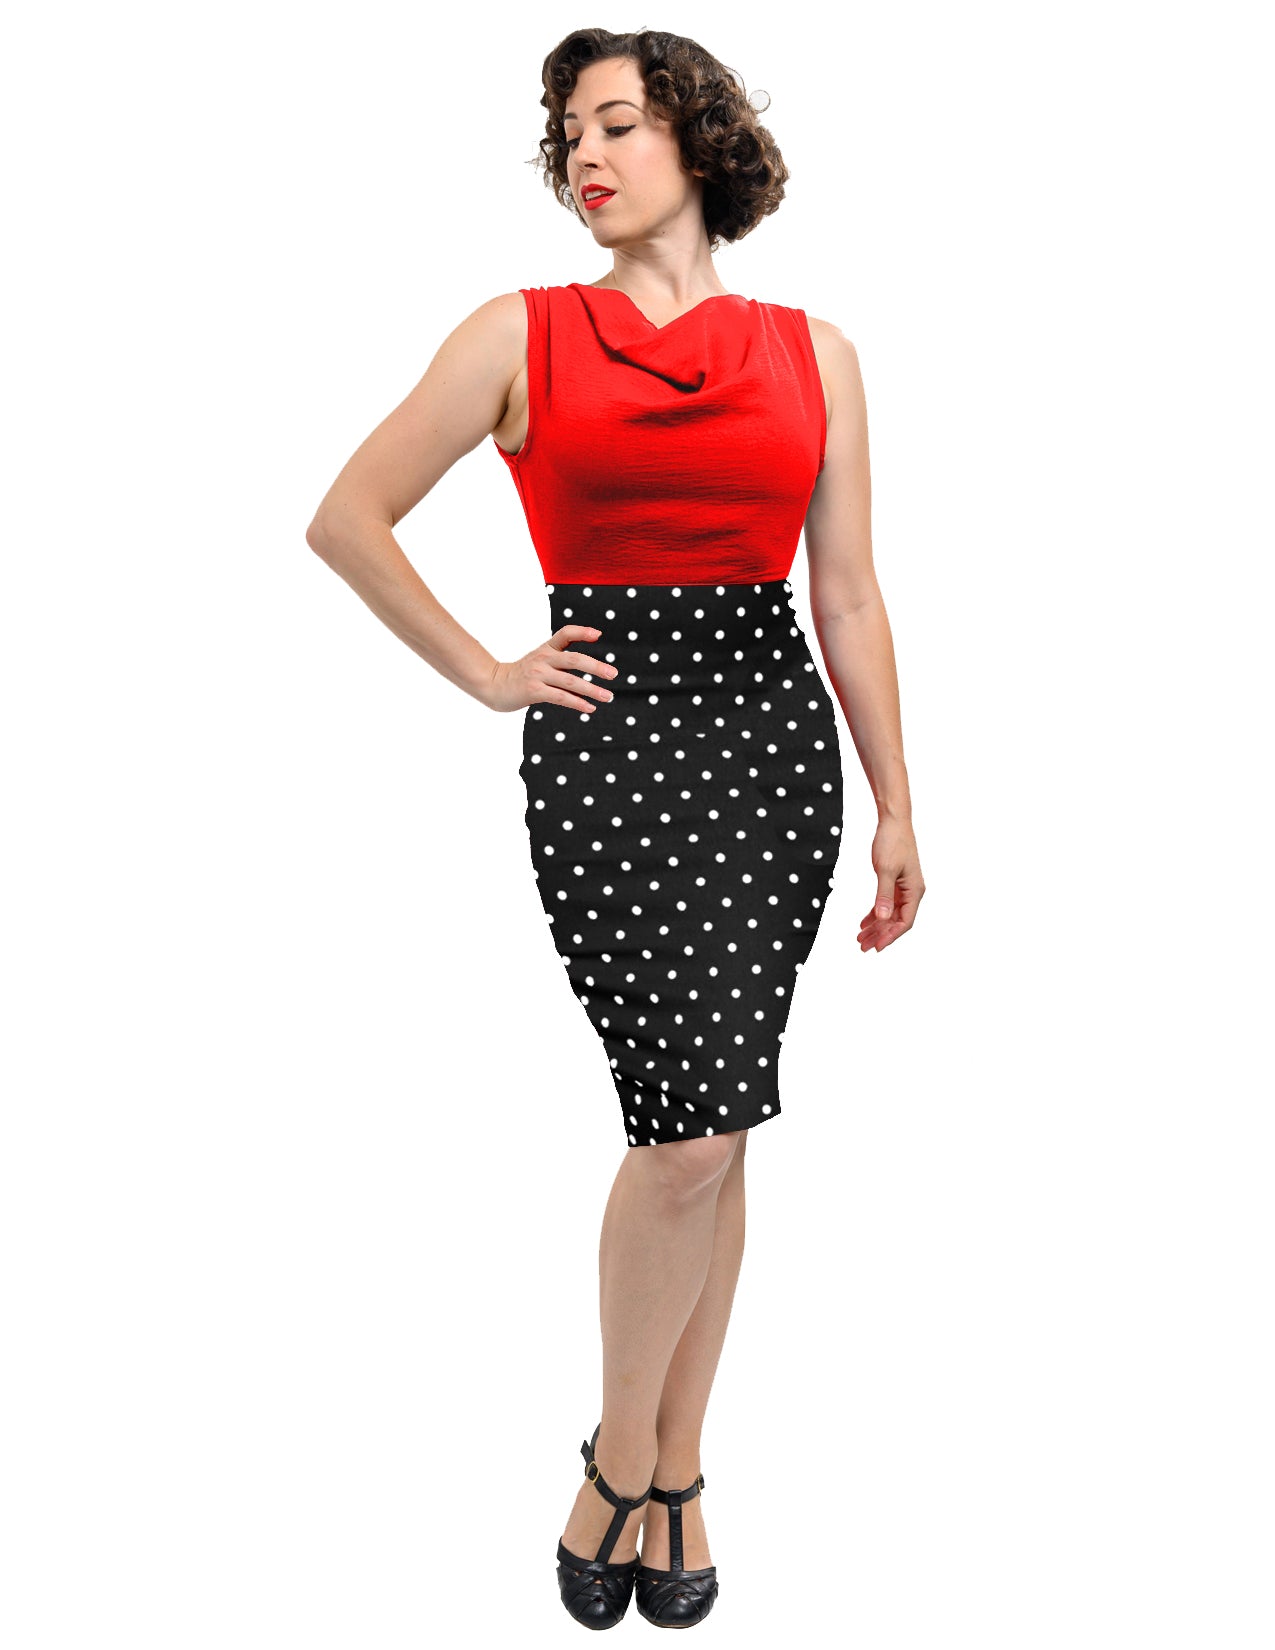 Shop Red and Black Two-Tone Dress